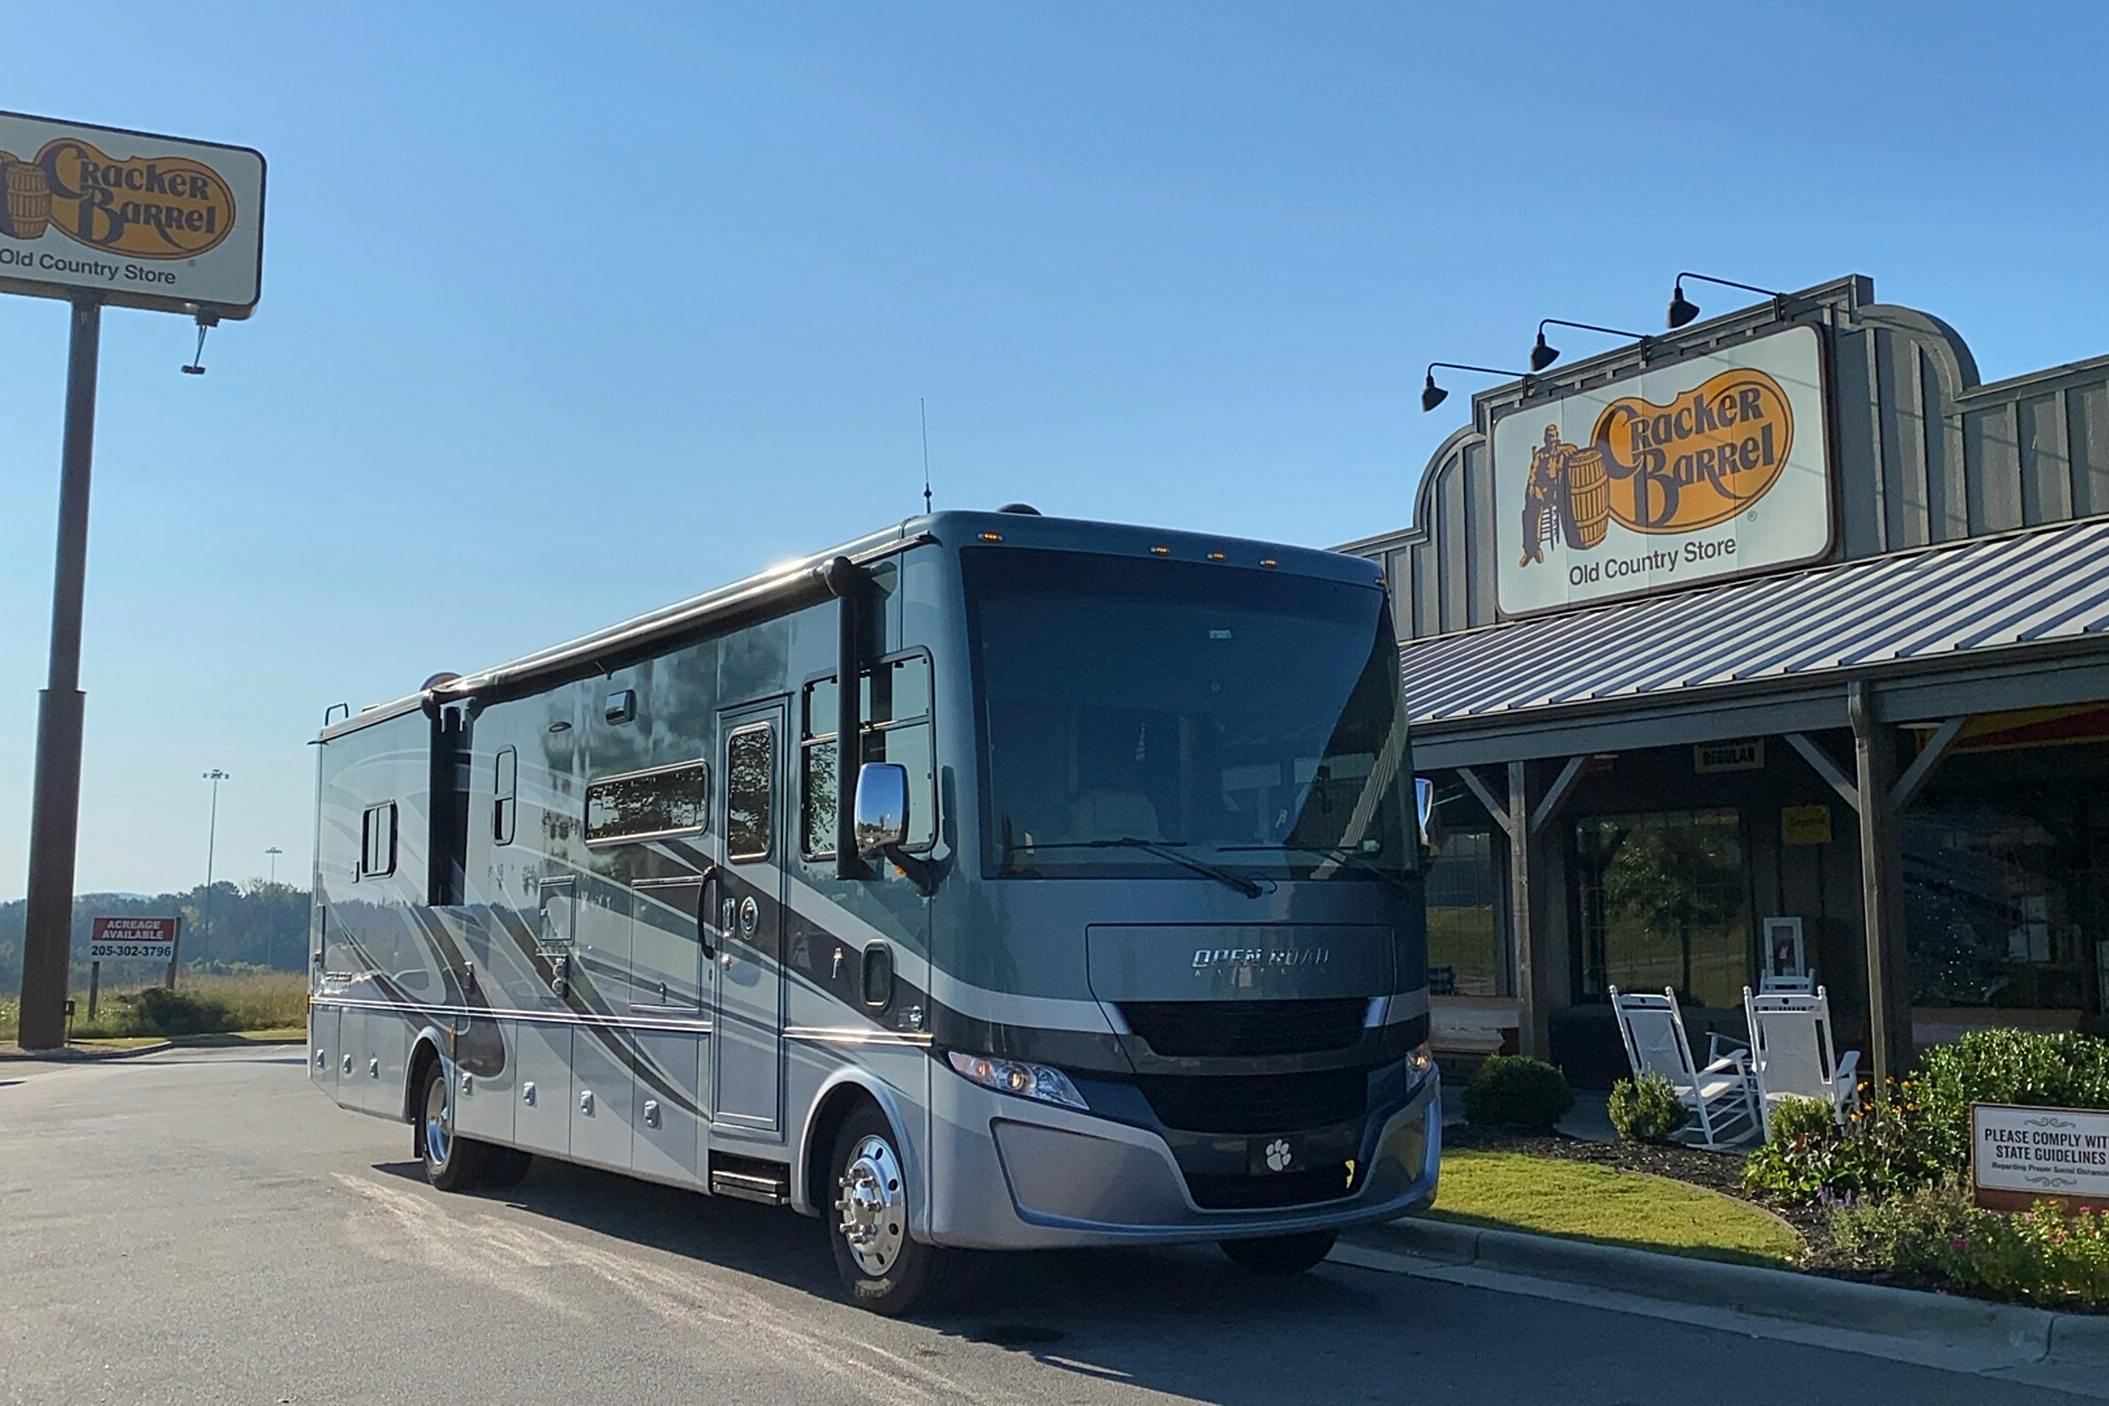 An RV parked in front of a Cracker Barrel restaurant